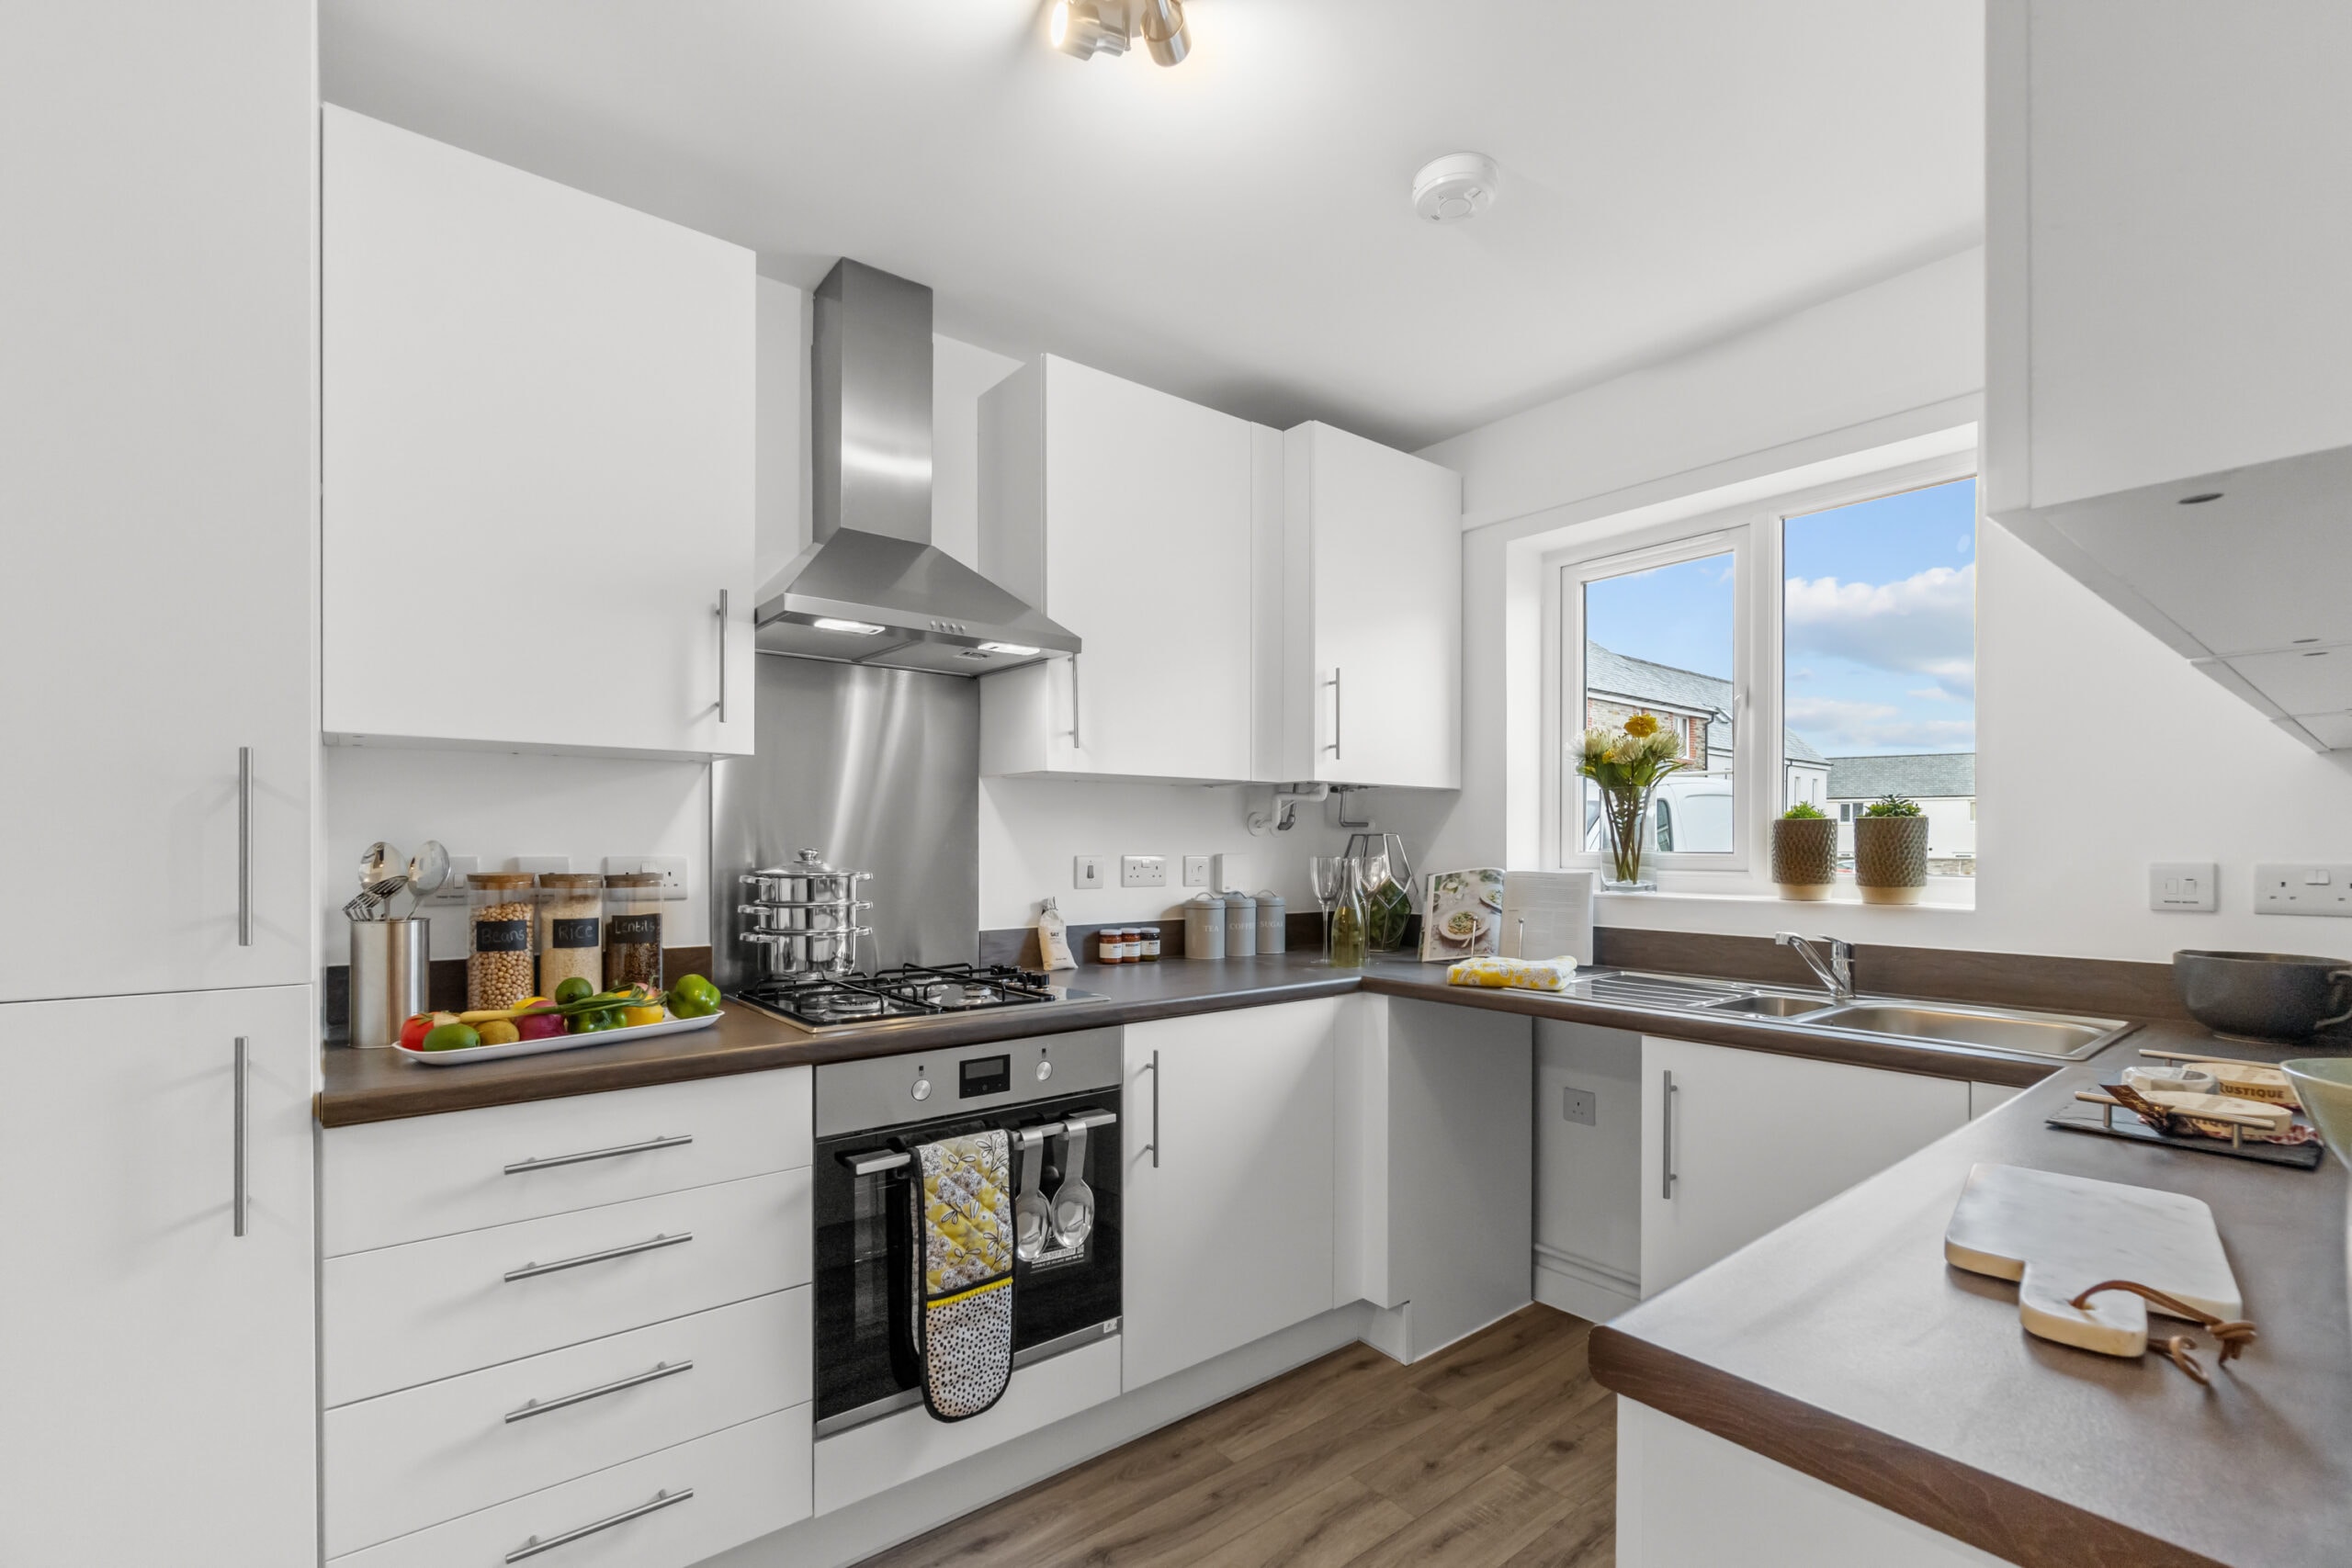 Image of a kitchen at Trevethan Meadows from LiveWest - available to purchase through Shared Ownership on Share to Buy!